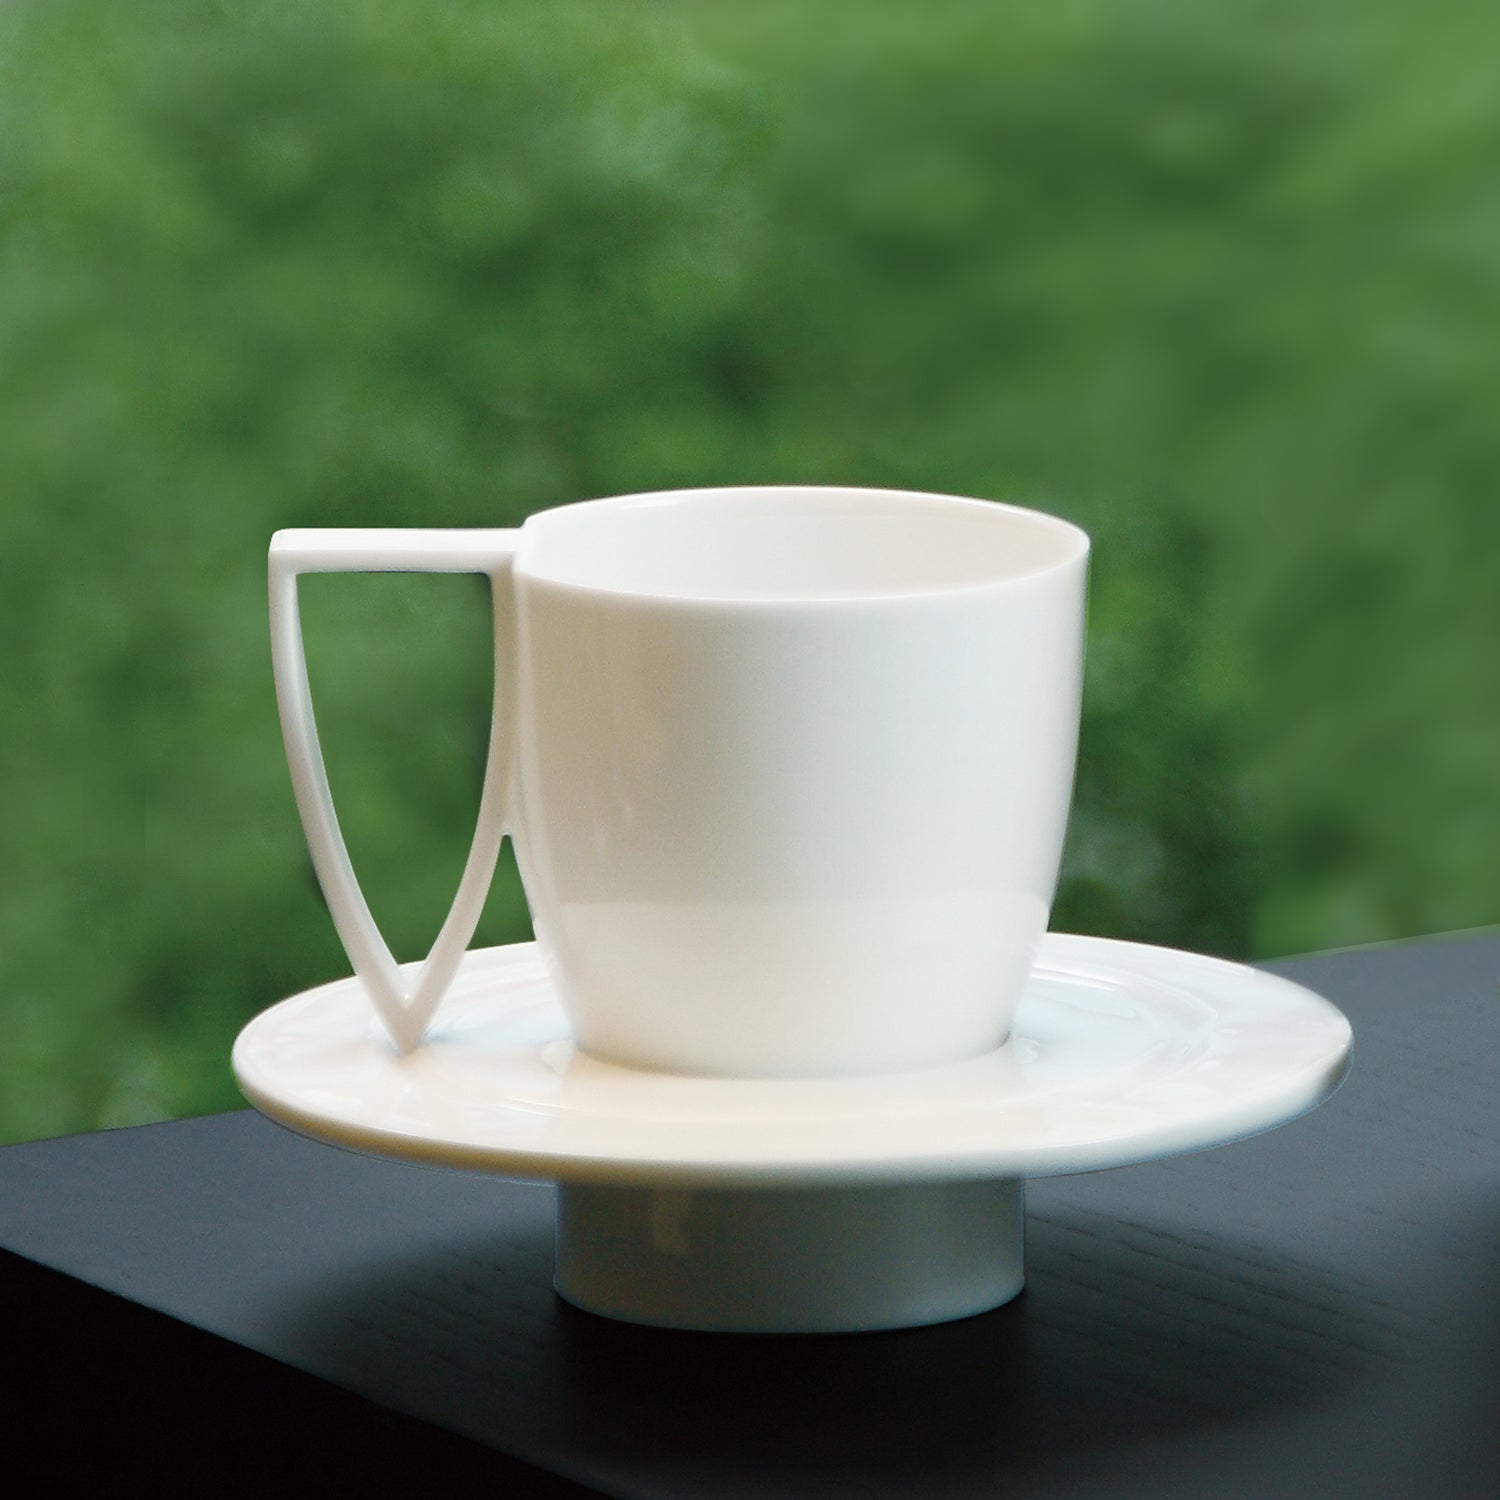 The Silhouette_Cup Saucer Set